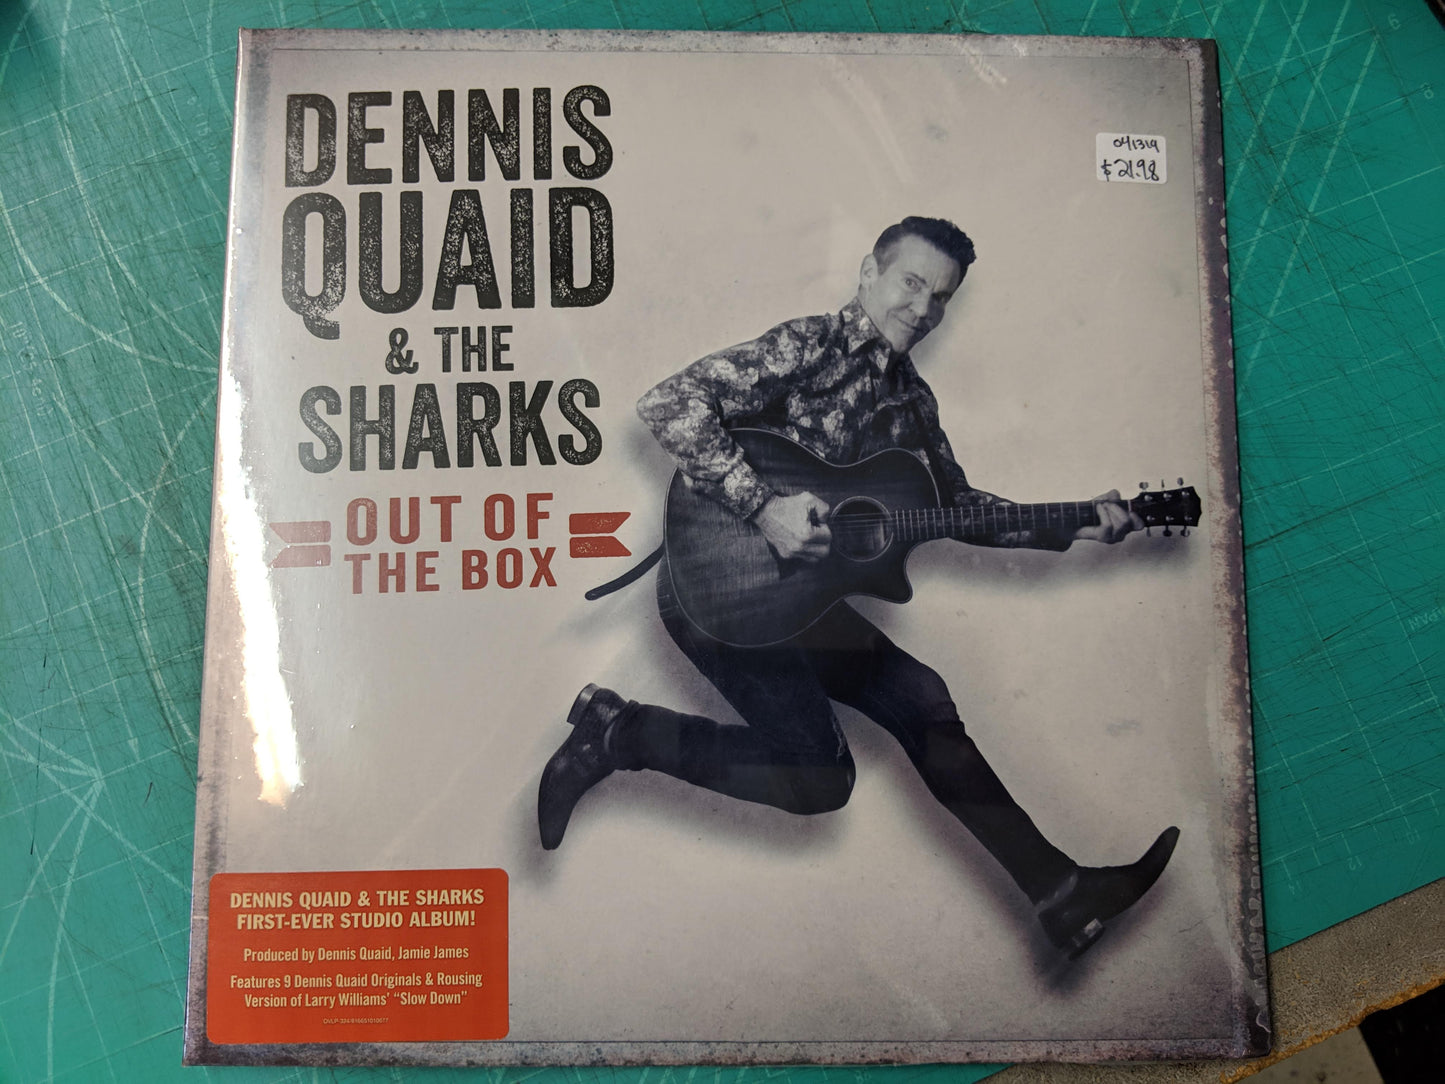 Dennis Quaid & The Sharks - Out of the Box LP